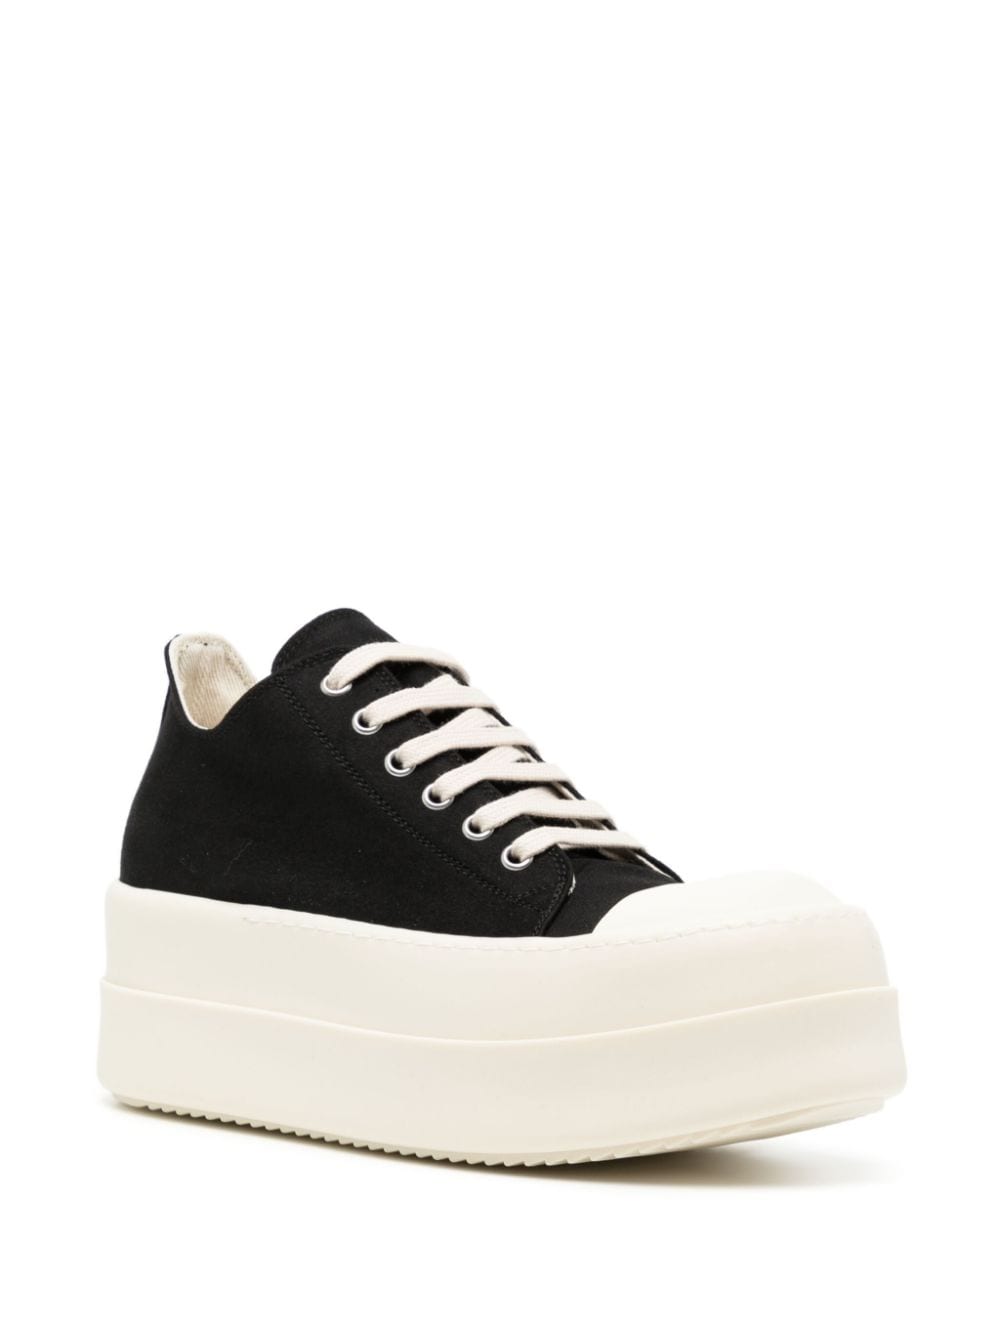 Image 2 of Rick Owens DRKSHDW Lido Double-Bumper lace-up sneakers